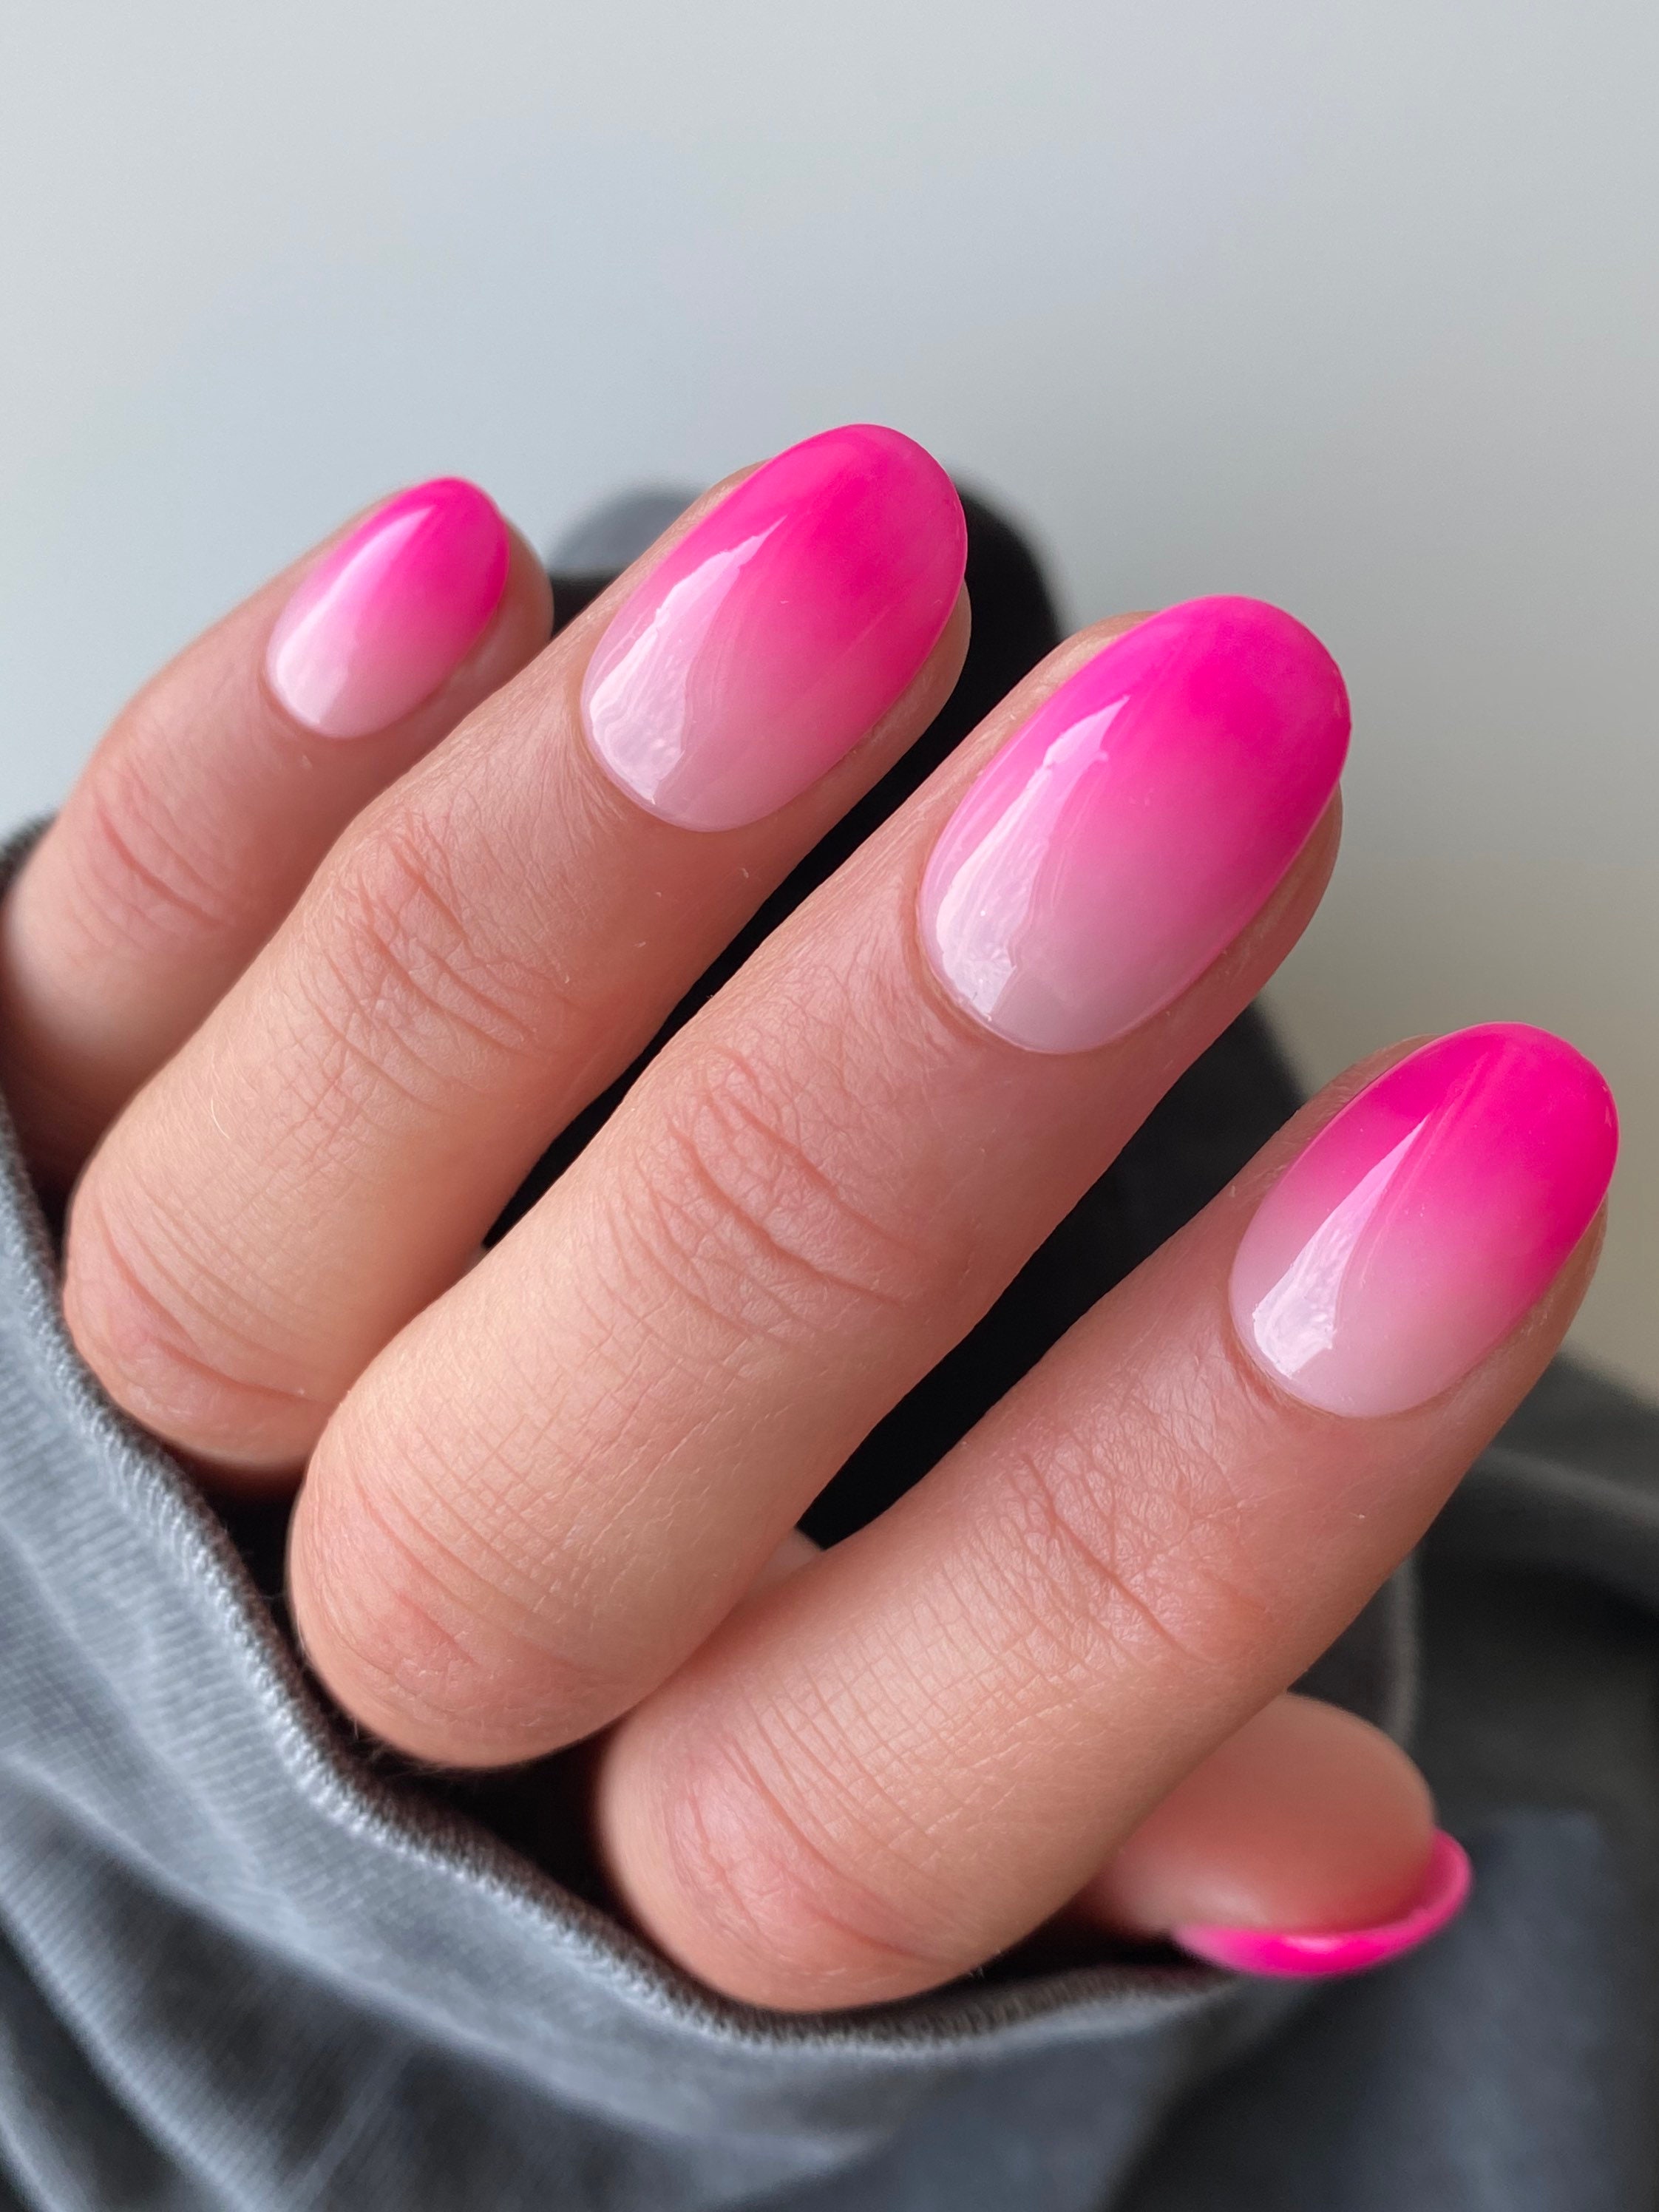 Pink nails. Neon madness!